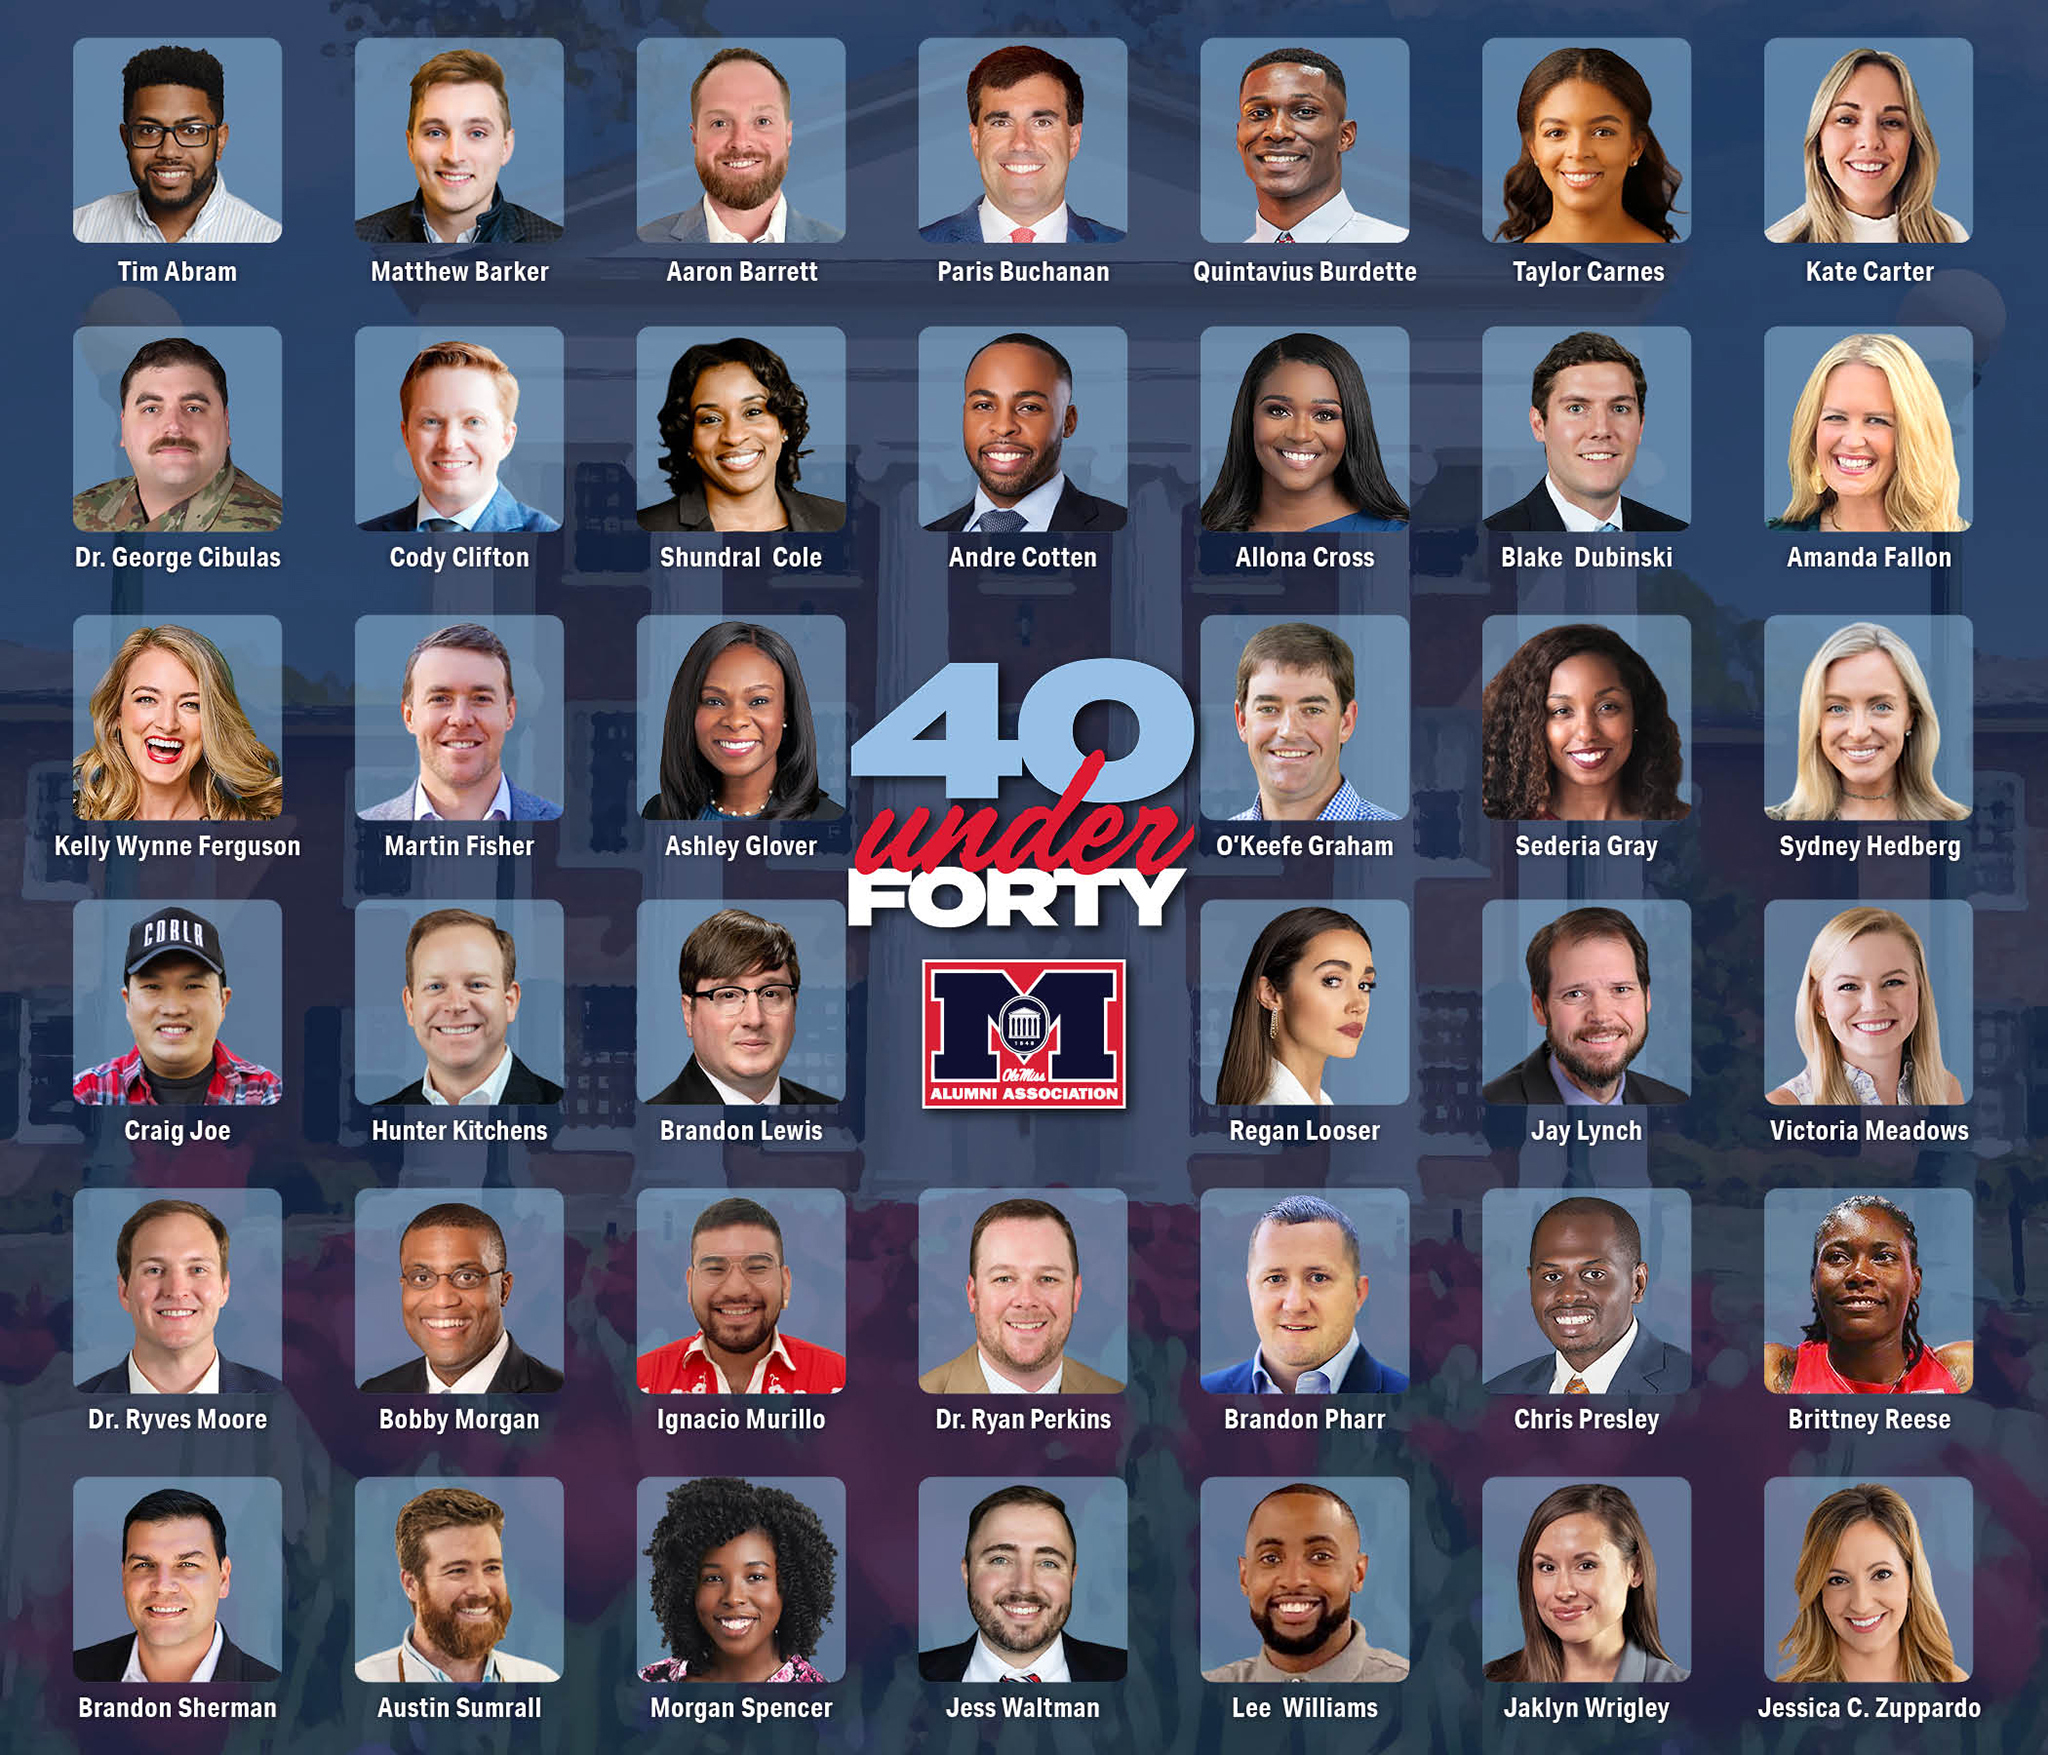 The Ole Miss Alumni Association has named its 40 Under 40 recipients for 2023. The honorees are a diverse group pursuing careers in design, technology, health care, athletics and even reality television.